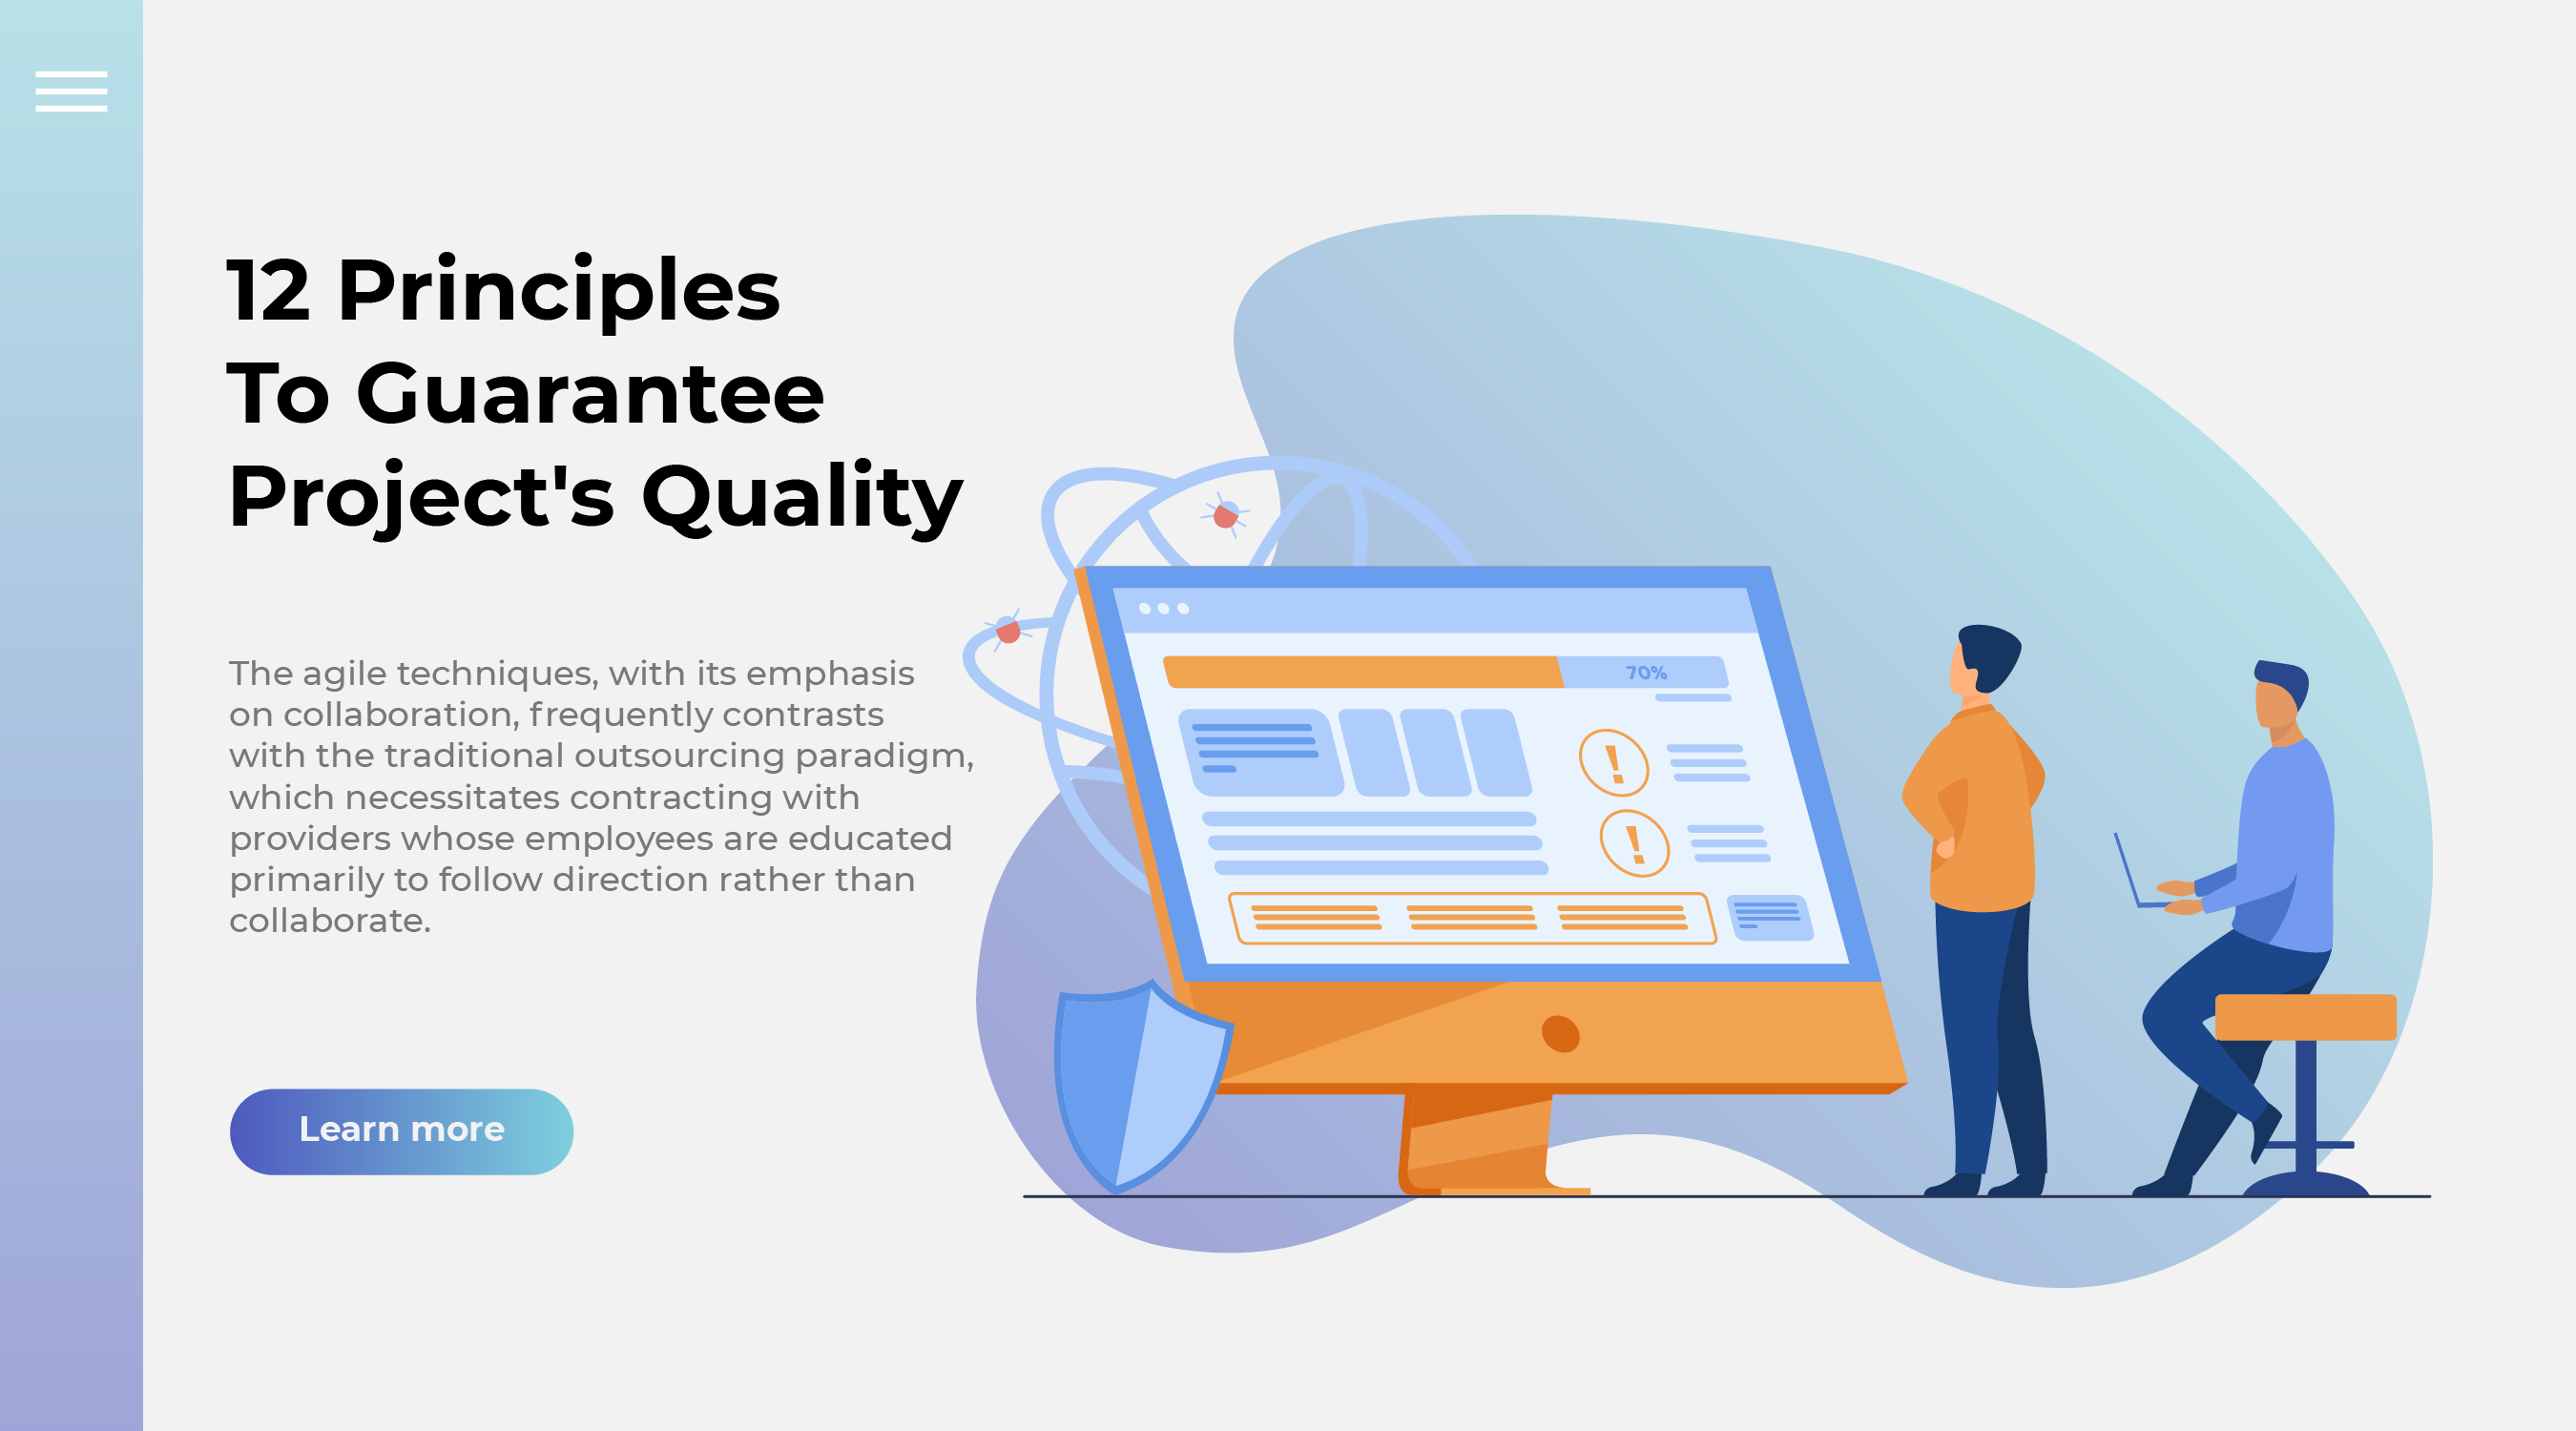 12 Principles To Guarantee Project’s Quality (Part 2)